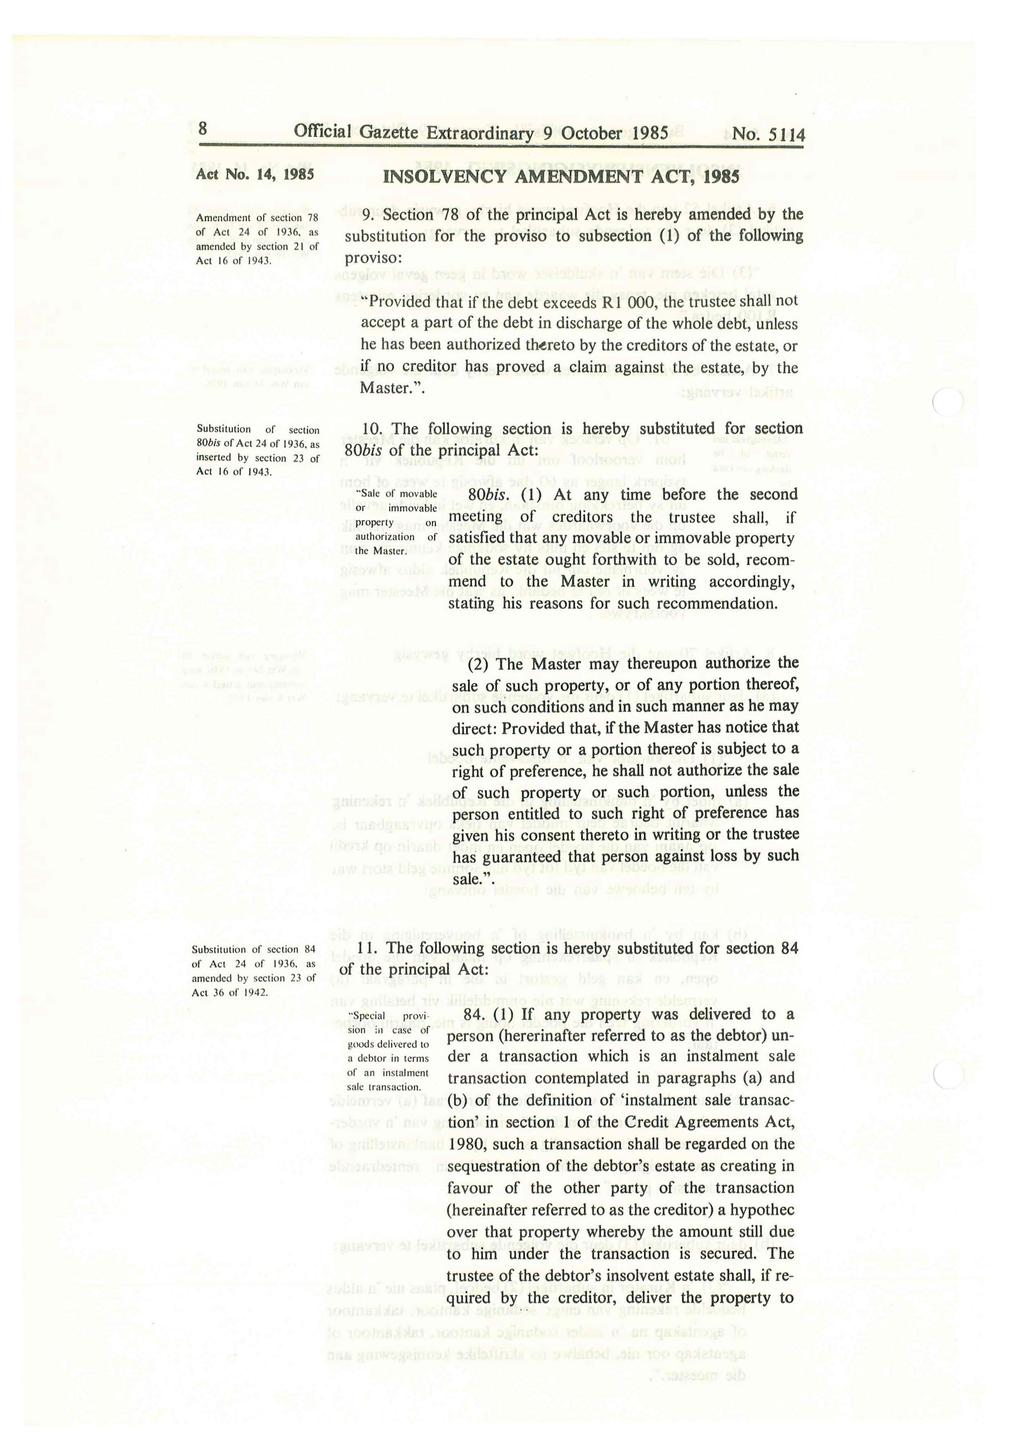 8 Official Gazette Extraordinary 9 October 1985 No. 5114 Act No. 14, 1985 Amendment of secti on 78 of Act 24 of 1936, as amended by section 2 1 of Act 16 of 1943. INSOLVENCY AMENDMENT ACT, 1985 9.